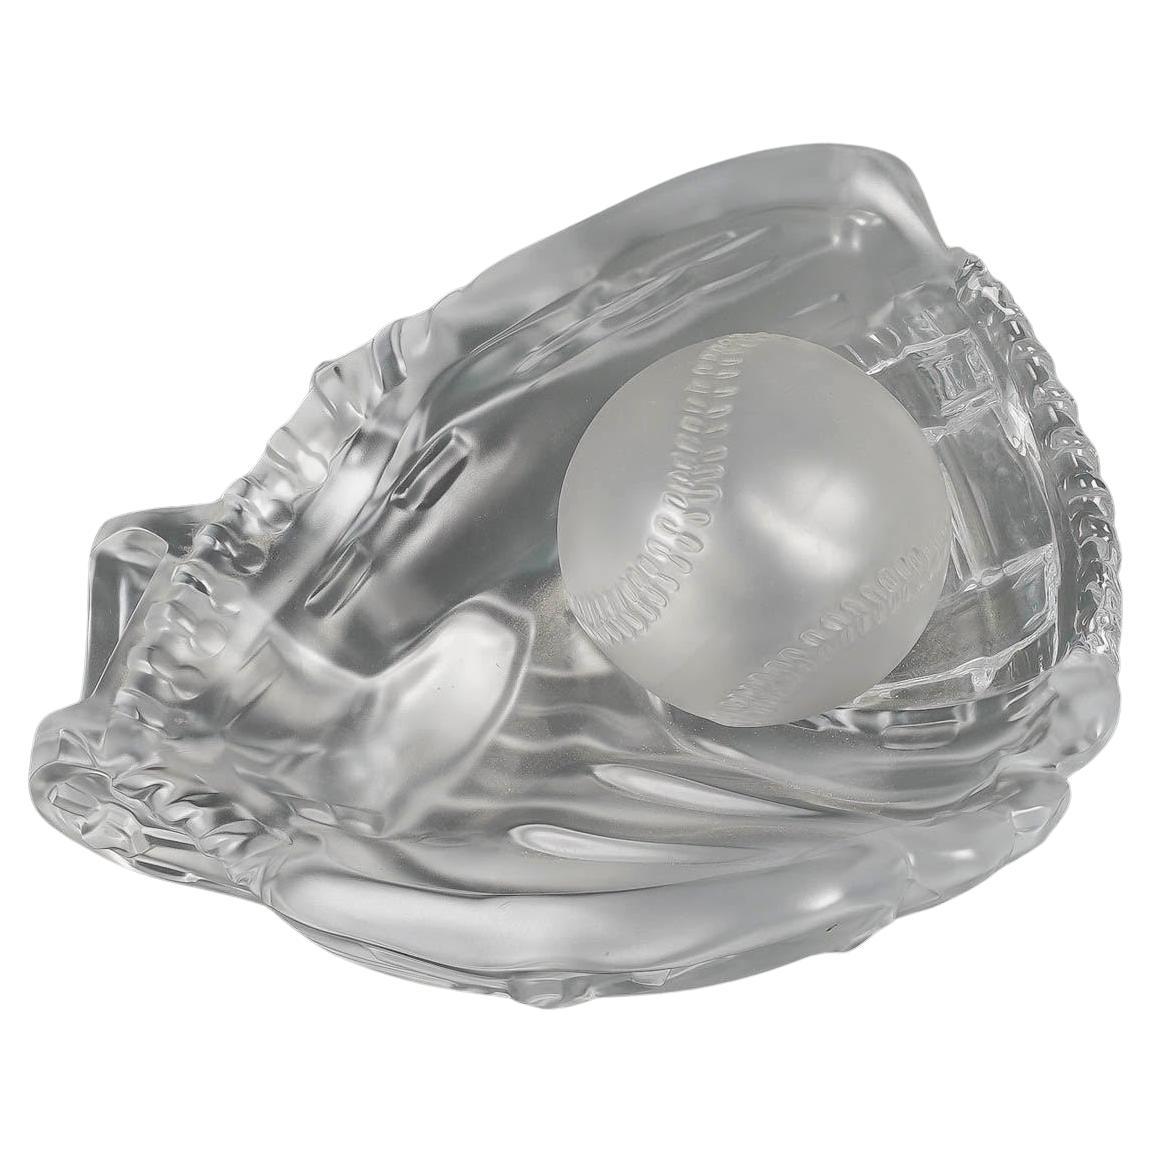 Crystal Baseball Glove Forming a Cup, 20th Century. For Sale